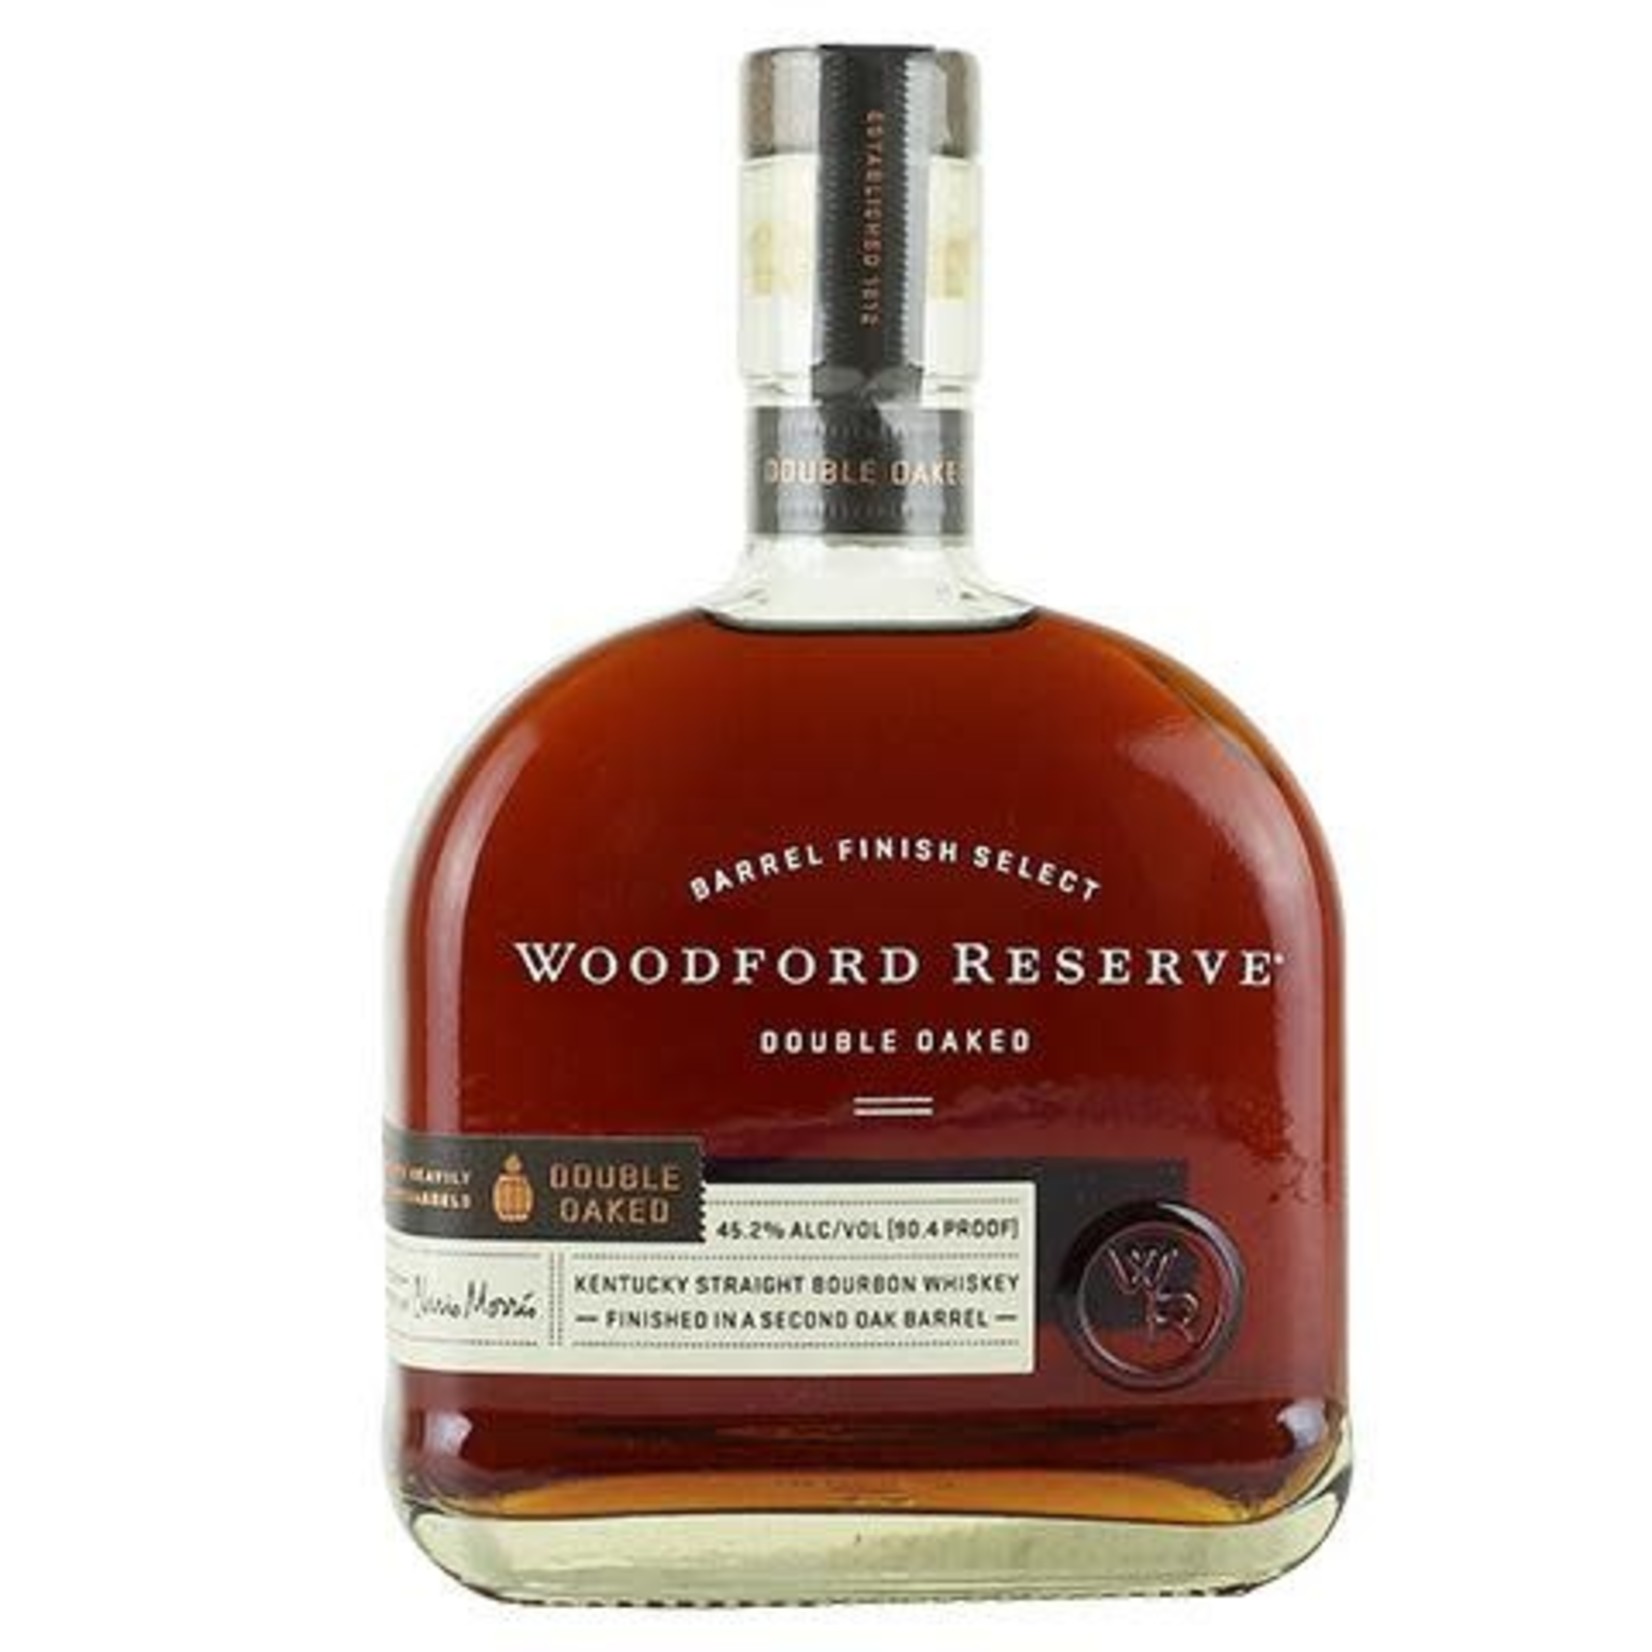 Woodford Reserve Woodford Reserve Double Oaked 750 mL